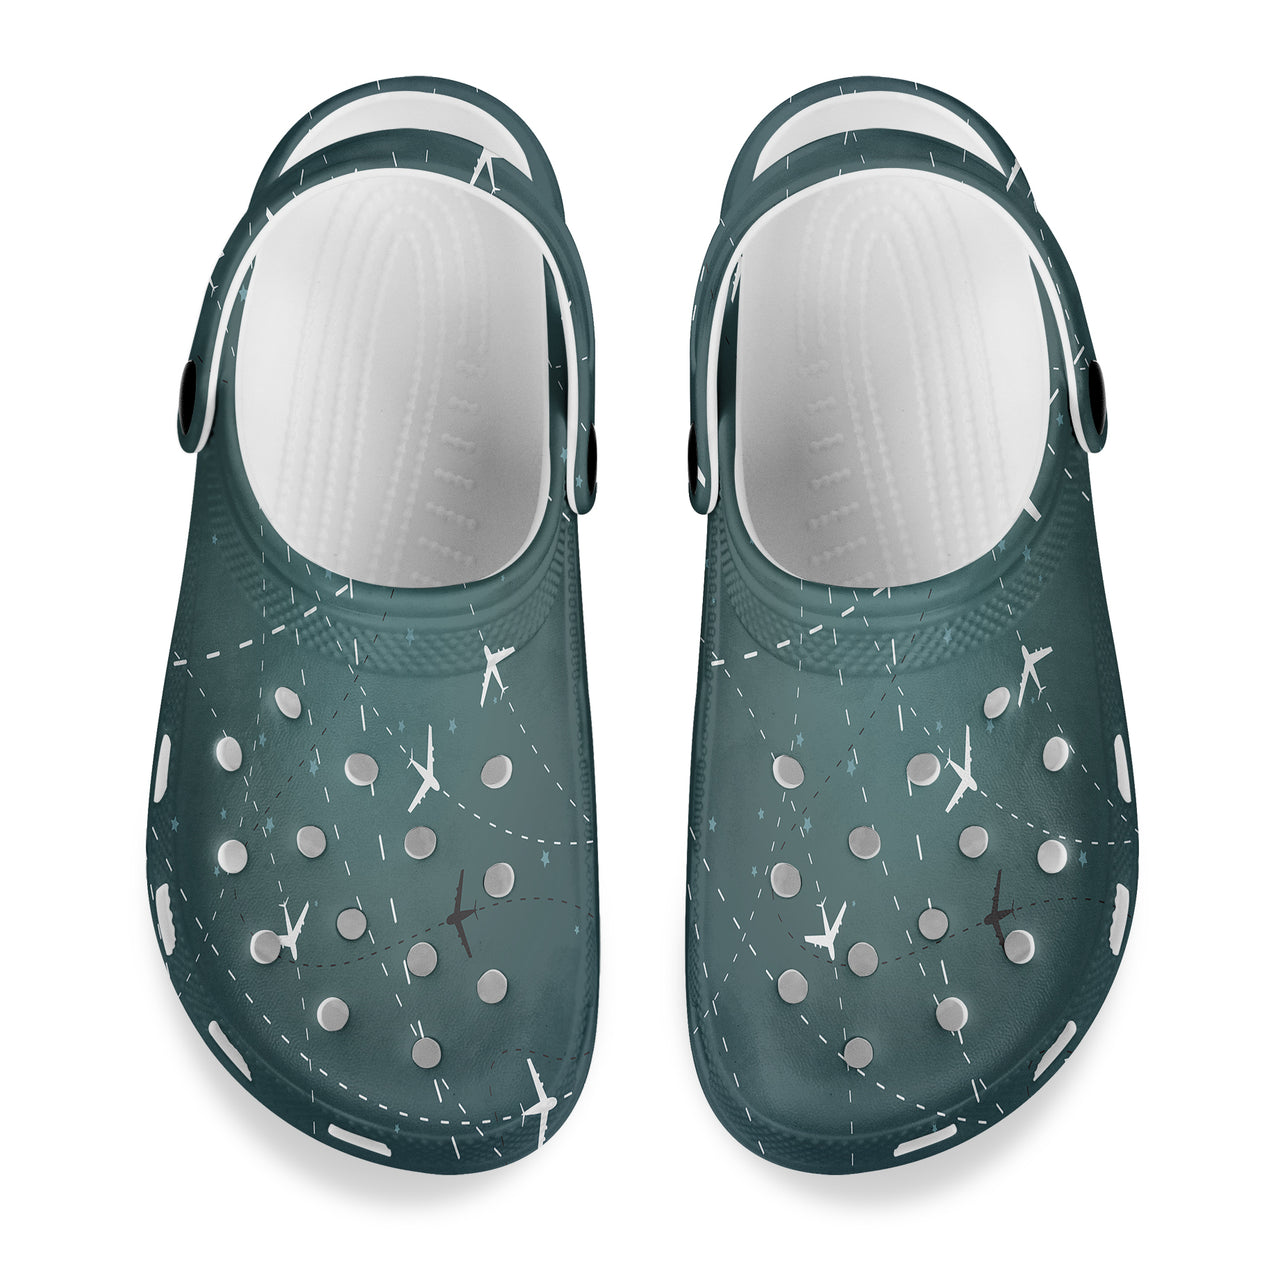 Travelling with Aircraft (Green) Designed Hole Shoes & Slippers (MEN)